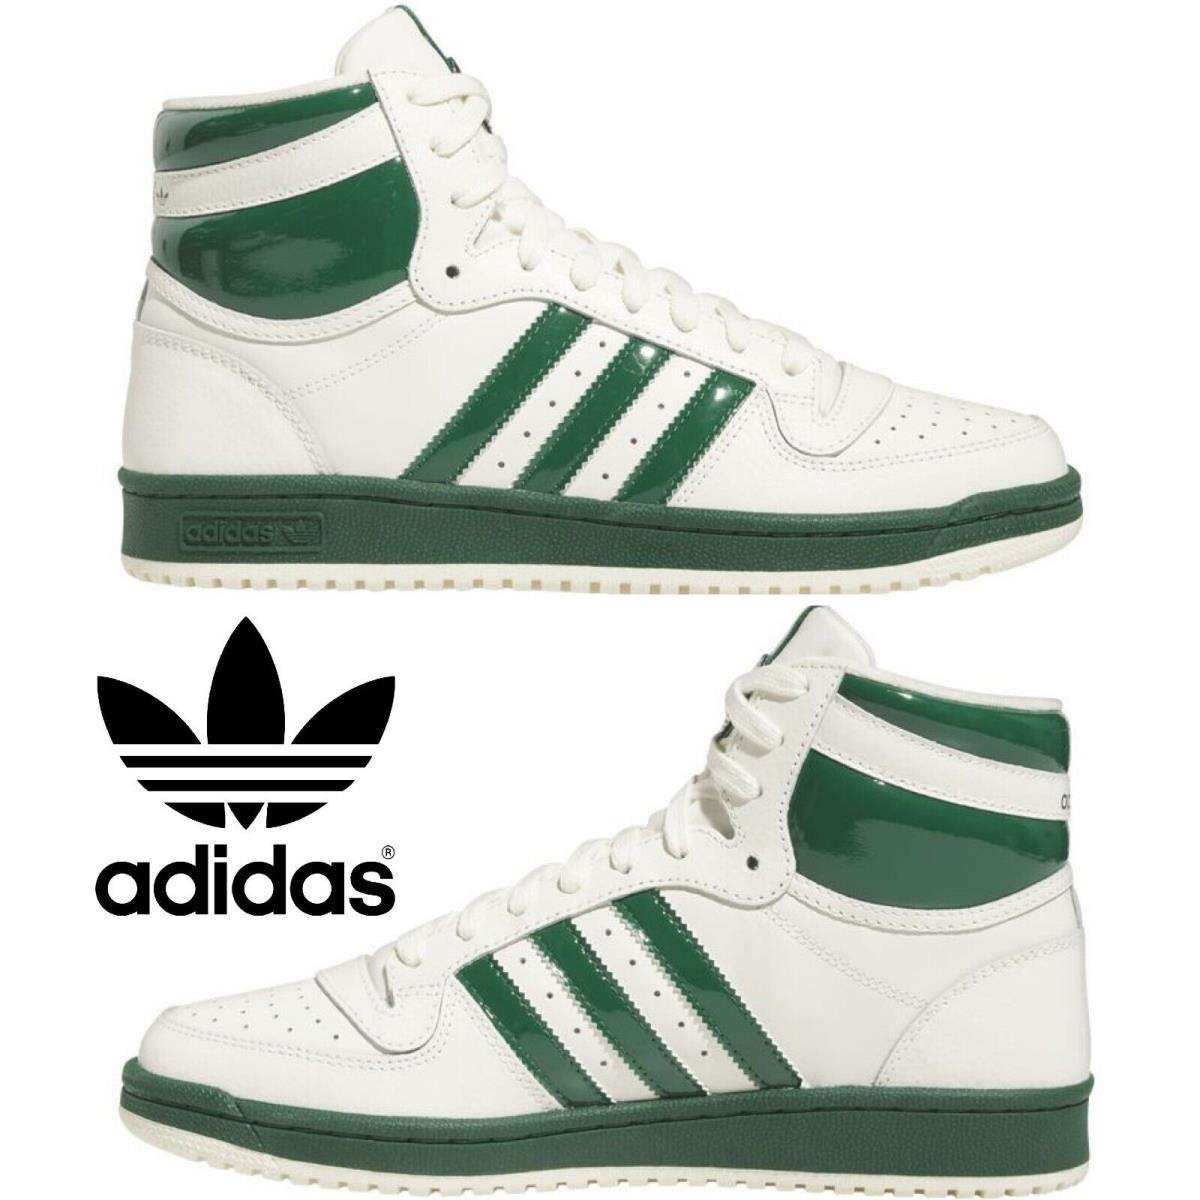 Adidas Originals Top Ten Men`s Sneakers Comfort Casual Shoes High Top Off White - White, Manufacturer: Off White/Dark Green